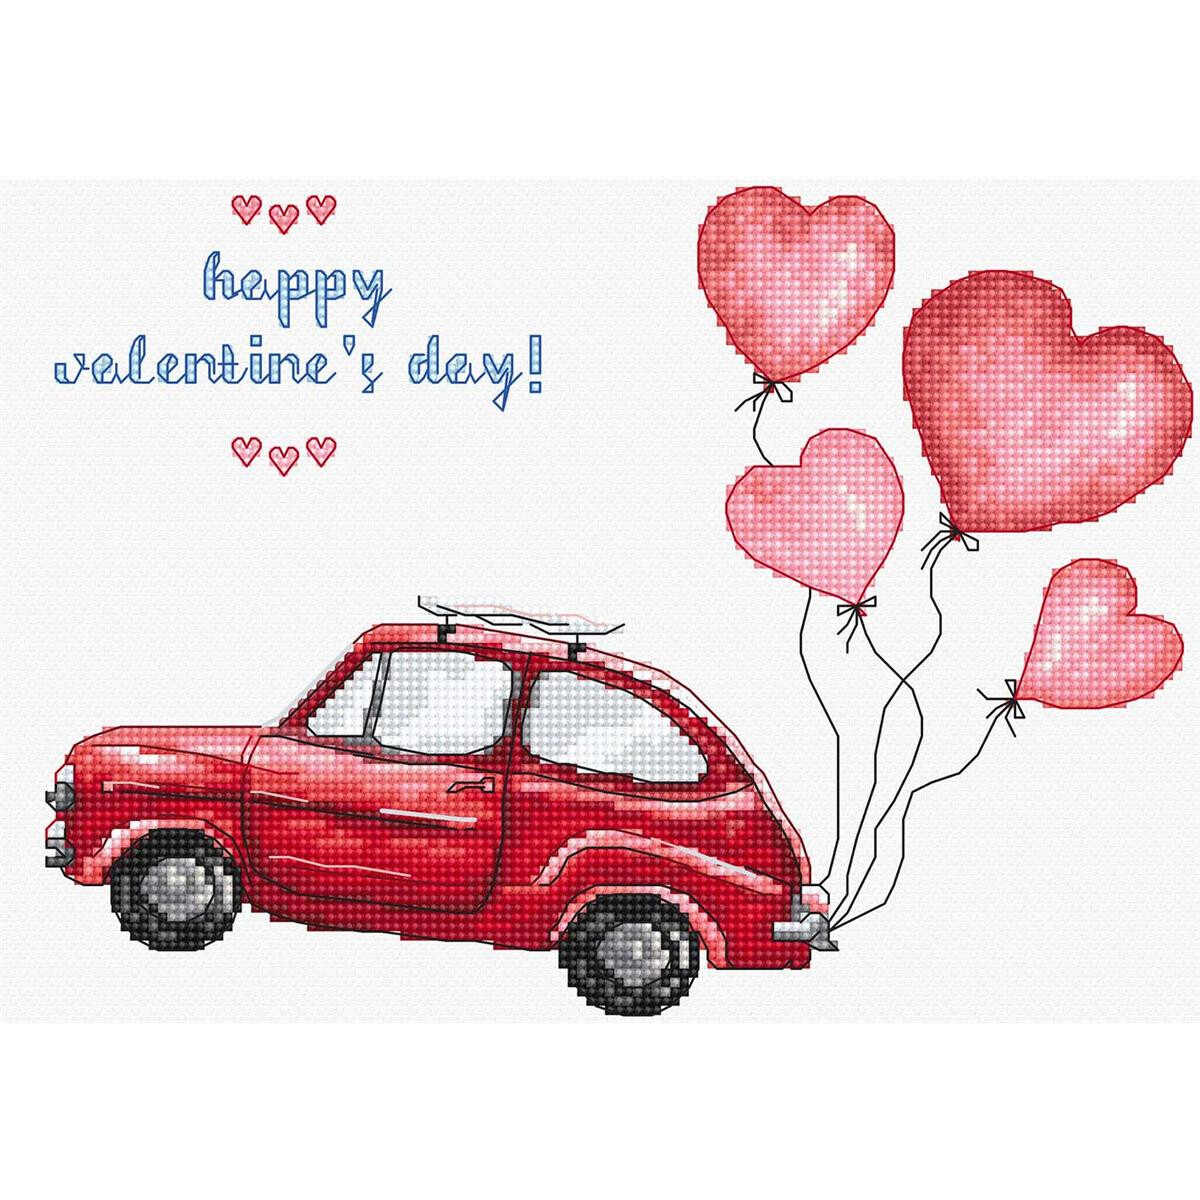 A pixel art image shows a red vintage car with four pink...